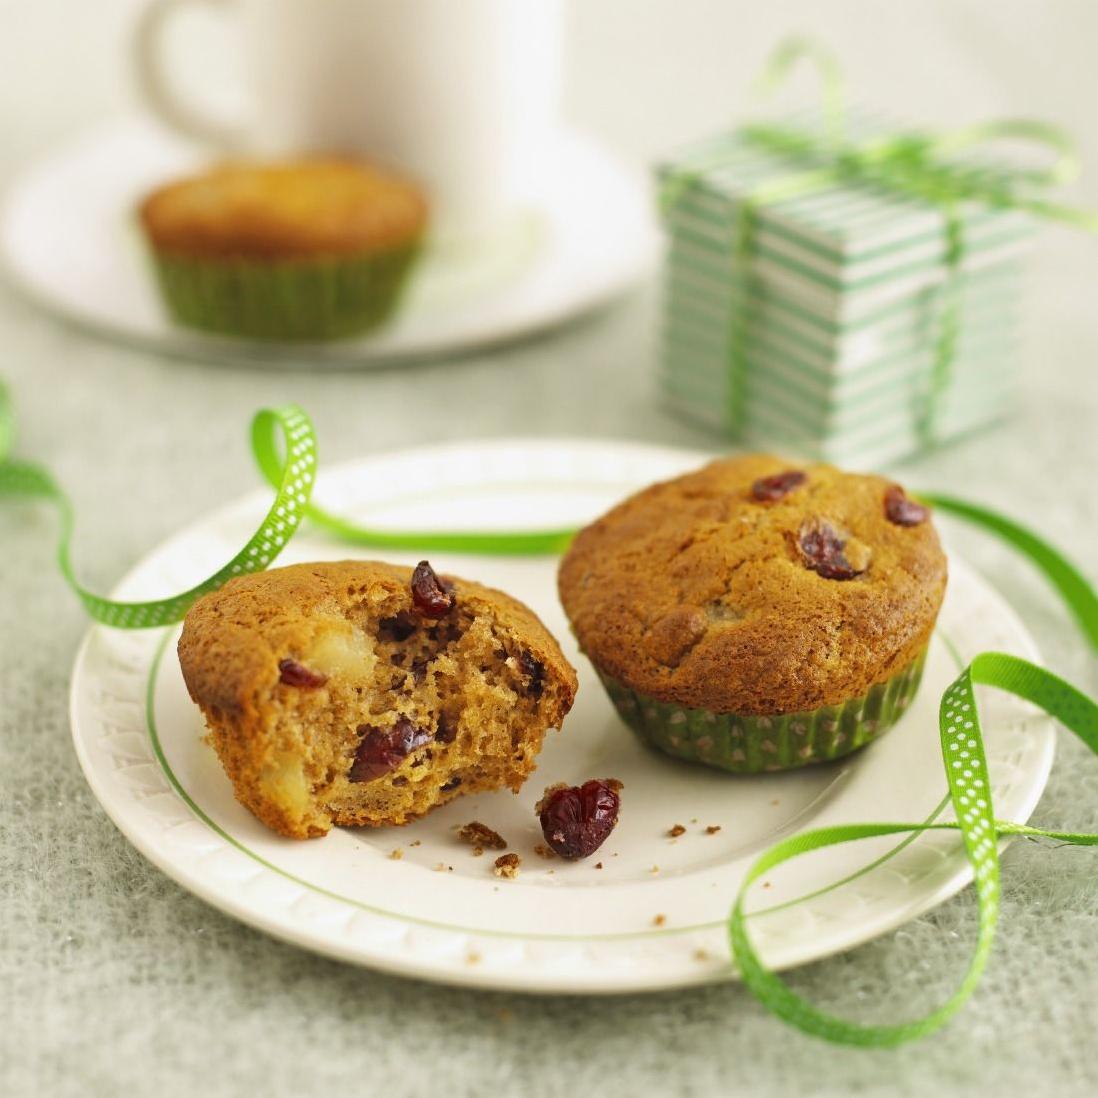  Gluten-free never tasted so good! These cranberry-apple muffins are a treat for your taste buds.